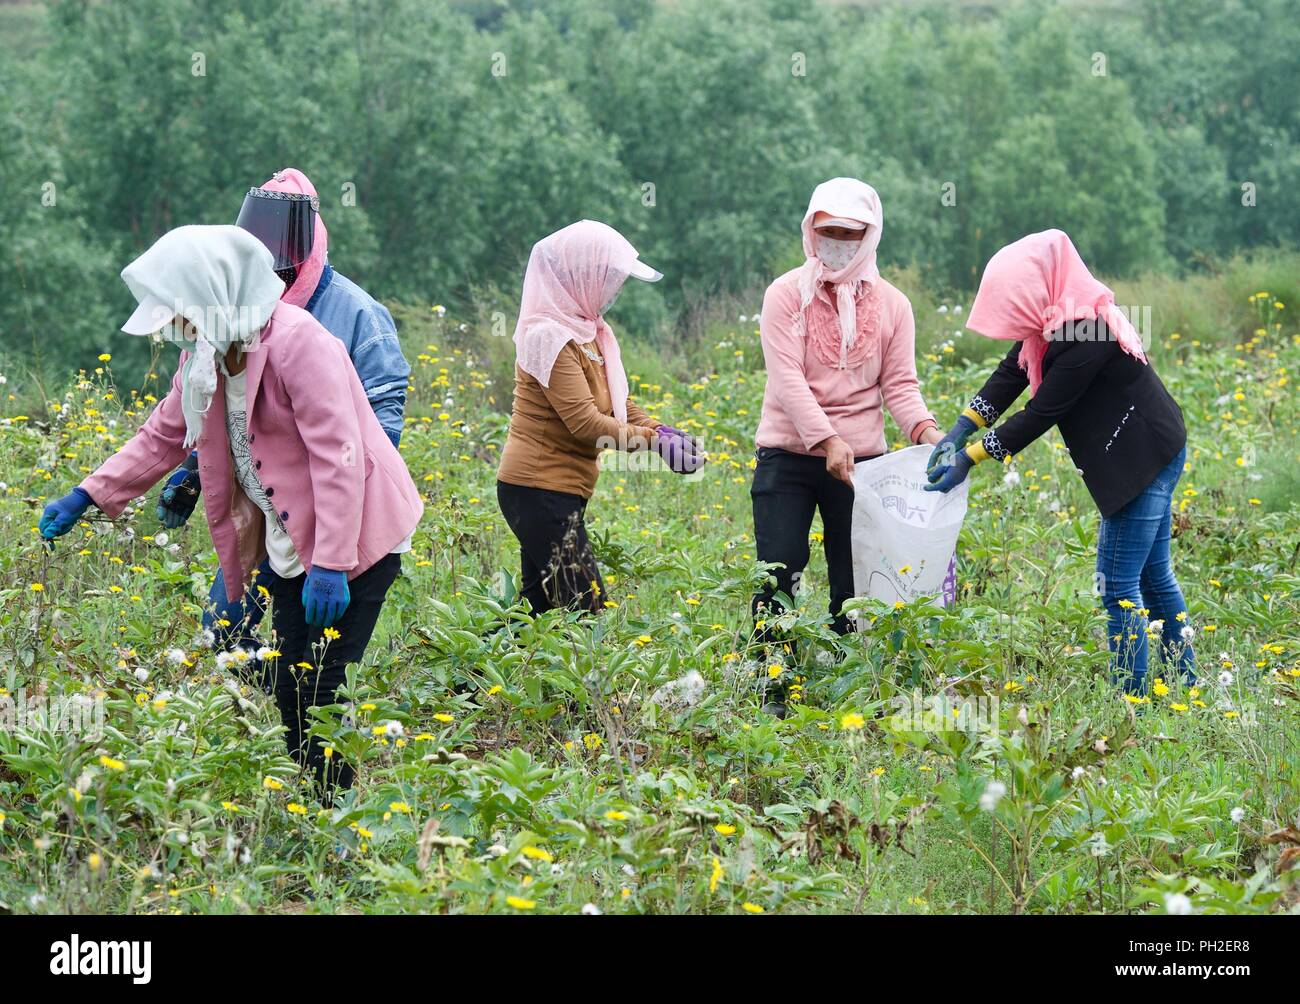 (180830) -- GUYUAN, Aug. 30, 2018 (Xinhua) -- Farmers pick peony flower seeds for oil manufacturing at a planting base in Yuanzhou District of Guyuan City, northwest China's Ningxia Hui Autonomous Region, Aug. 28, 2018. Yuanzhou government started to cooperate with the peony seed oil company Ruidanyuan in 2014 to establish a peony planting base for processing and production of peony products on barren mountains. So far, the planting base has created over 300 job opportunities for impoverished locals and achieved sound improvements on environmental protection. (Xinhua/Jiang Kehong) (hxy) Stock Photo